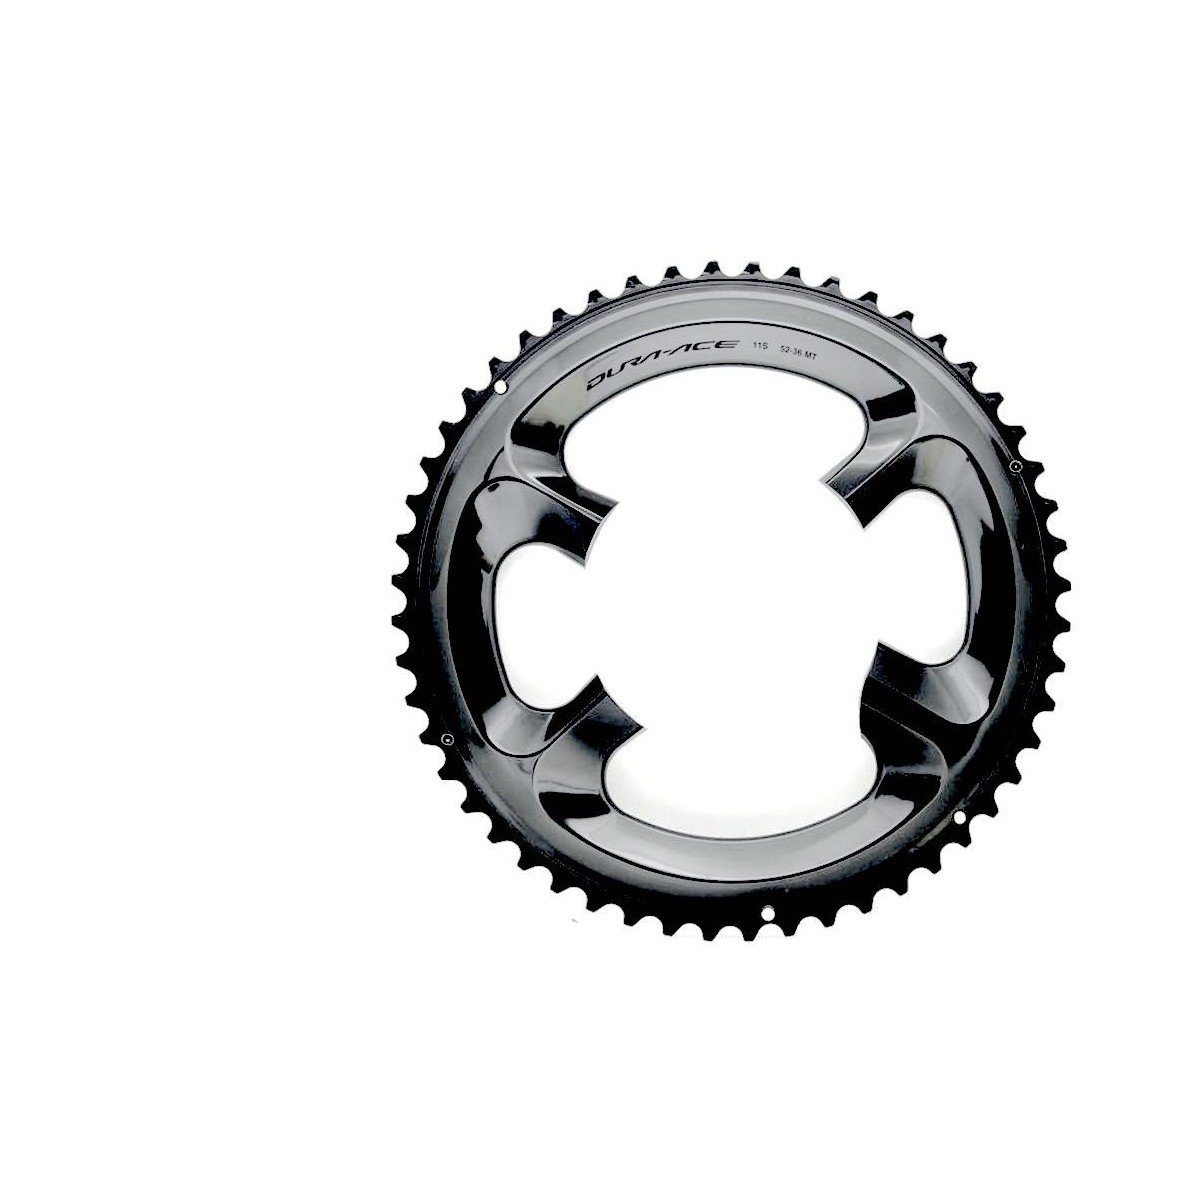 Shimano Dura Ace FC-R9100 52T-MT road chainrings